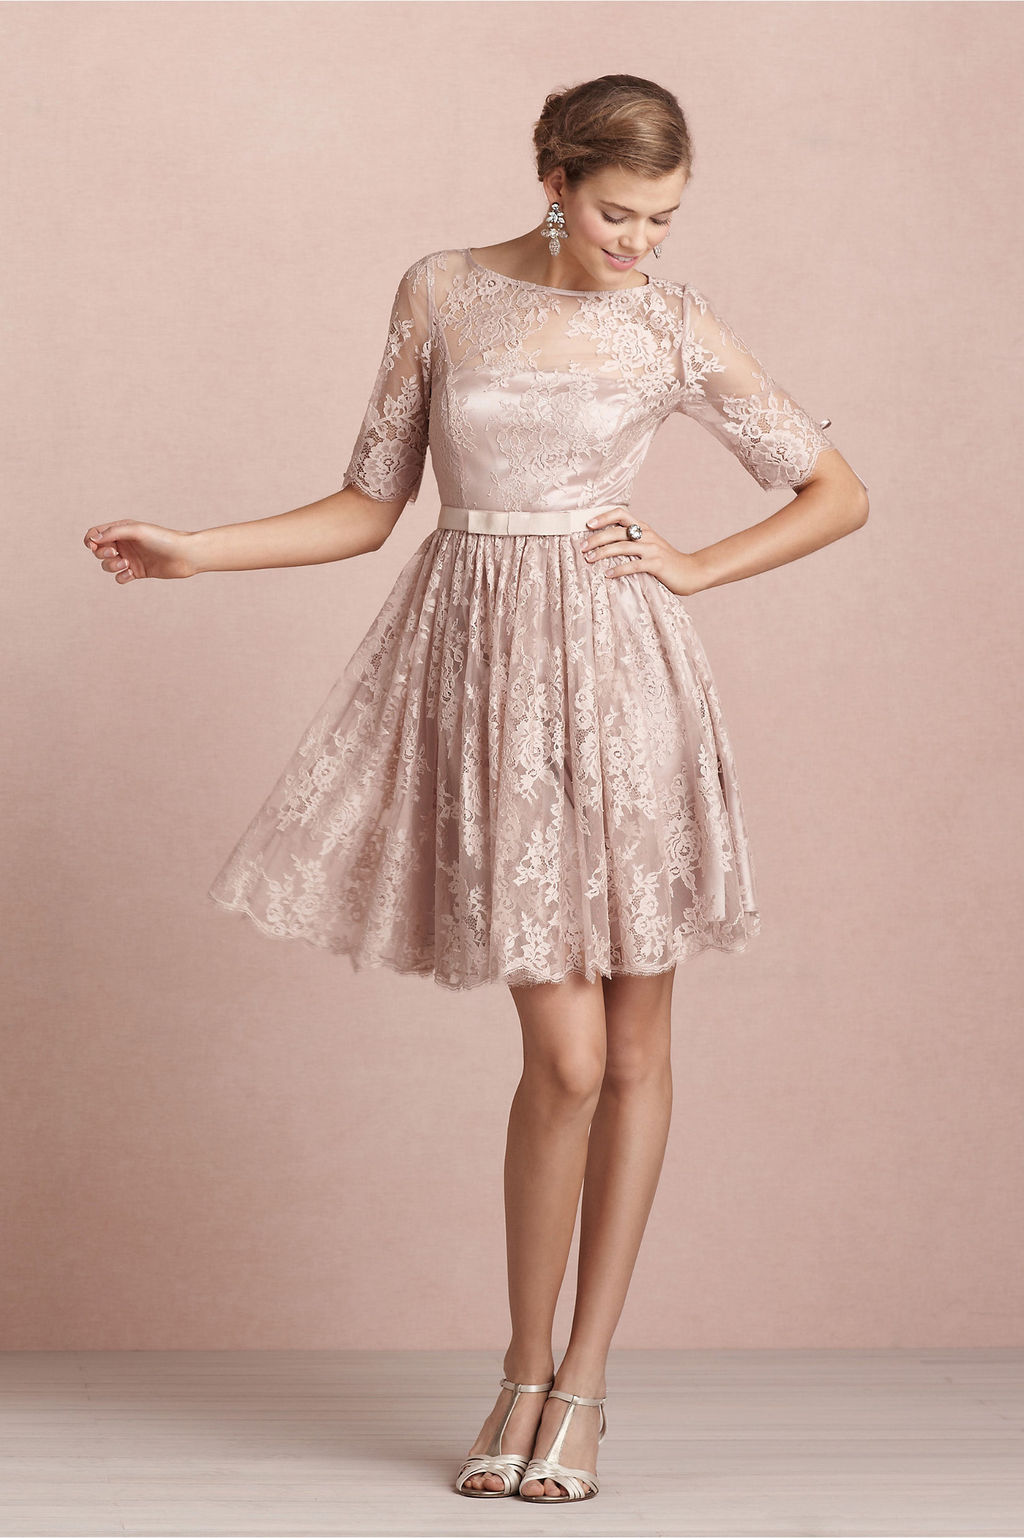 Bateau Neck Long Sleeved Lace Pattern Bridesmaid Dress with Bow Ribbon